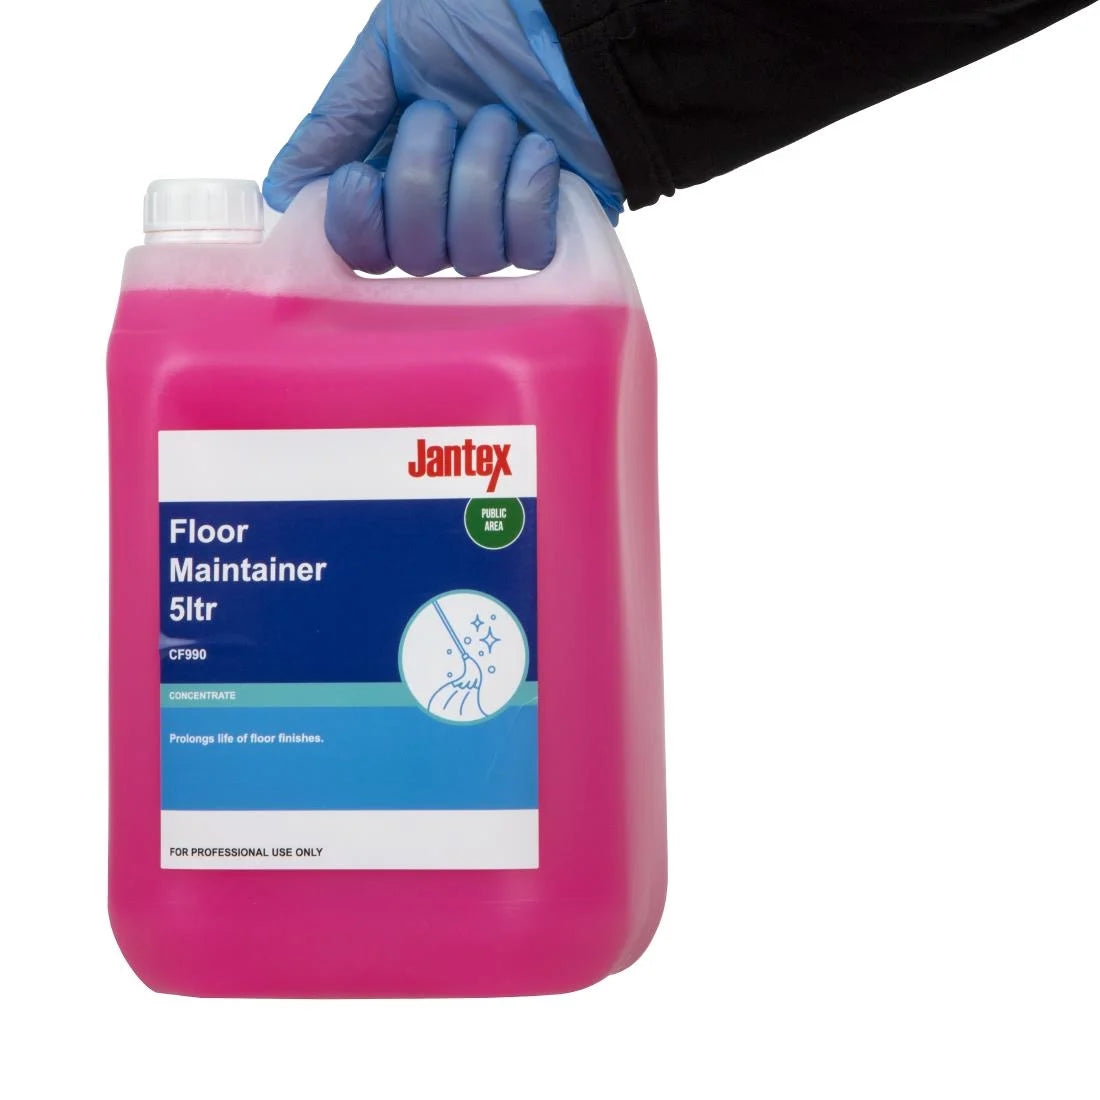 Jantex Floor Cleaner and Maintainer Concentrate 5Ltr JD Catering Equipment Solutions Ltd